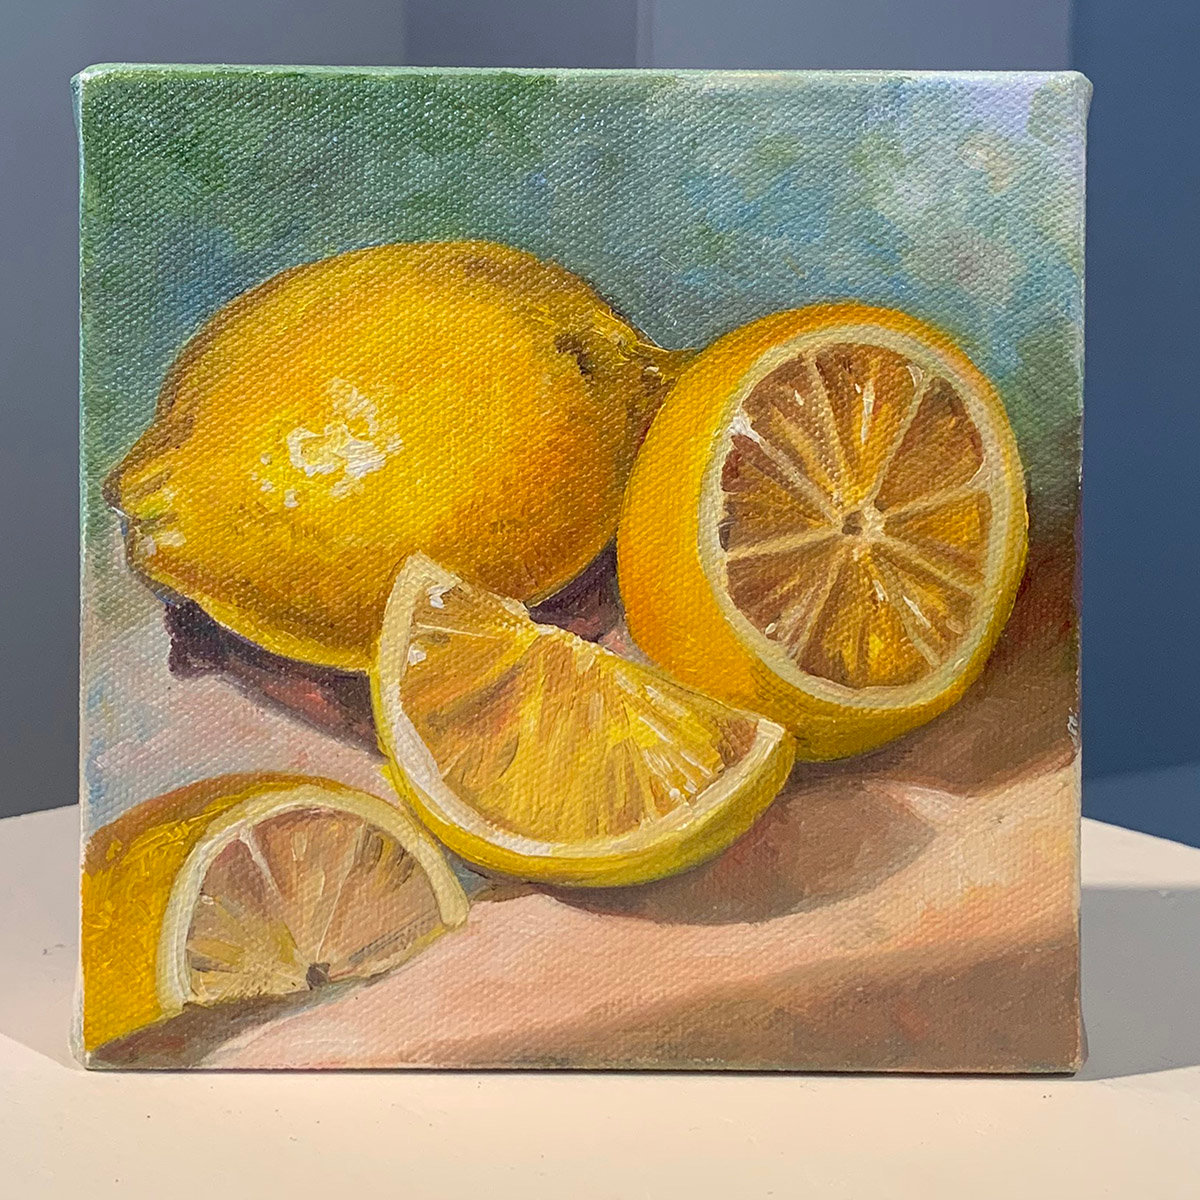 "Make Lemonade" by Valerie Taggart will be shown at "Art in Sixes."